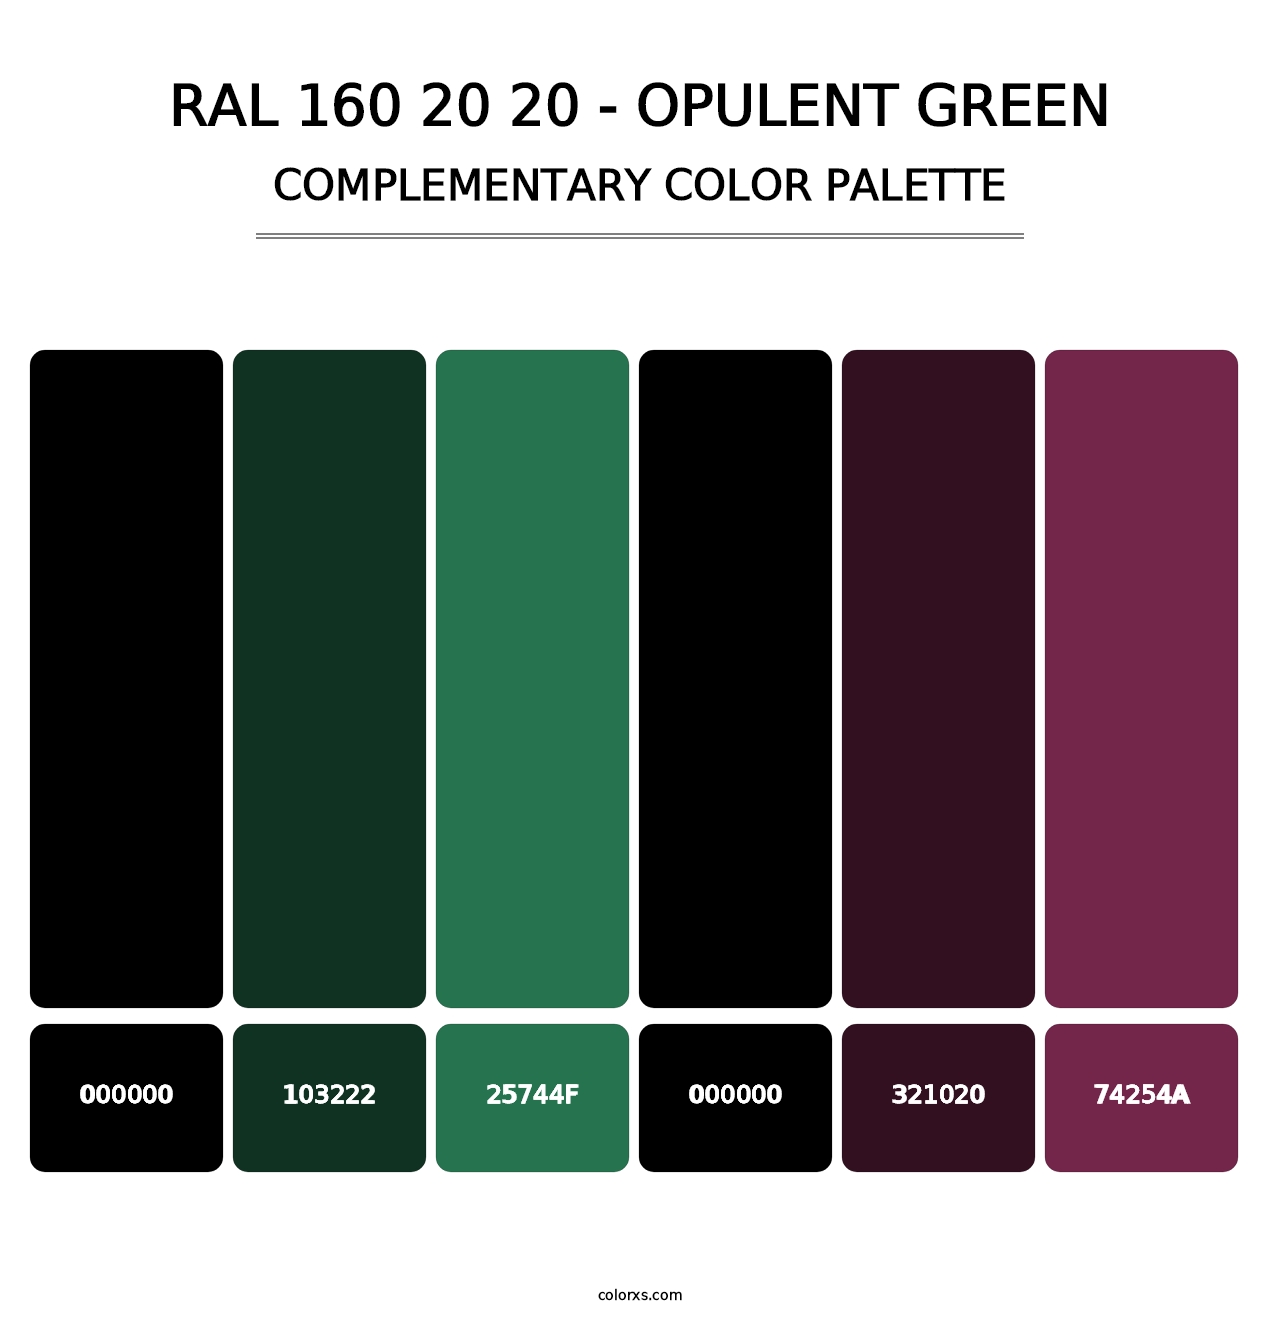 RAL 160 20 20 - Opulent Green - Complementary Color Palette